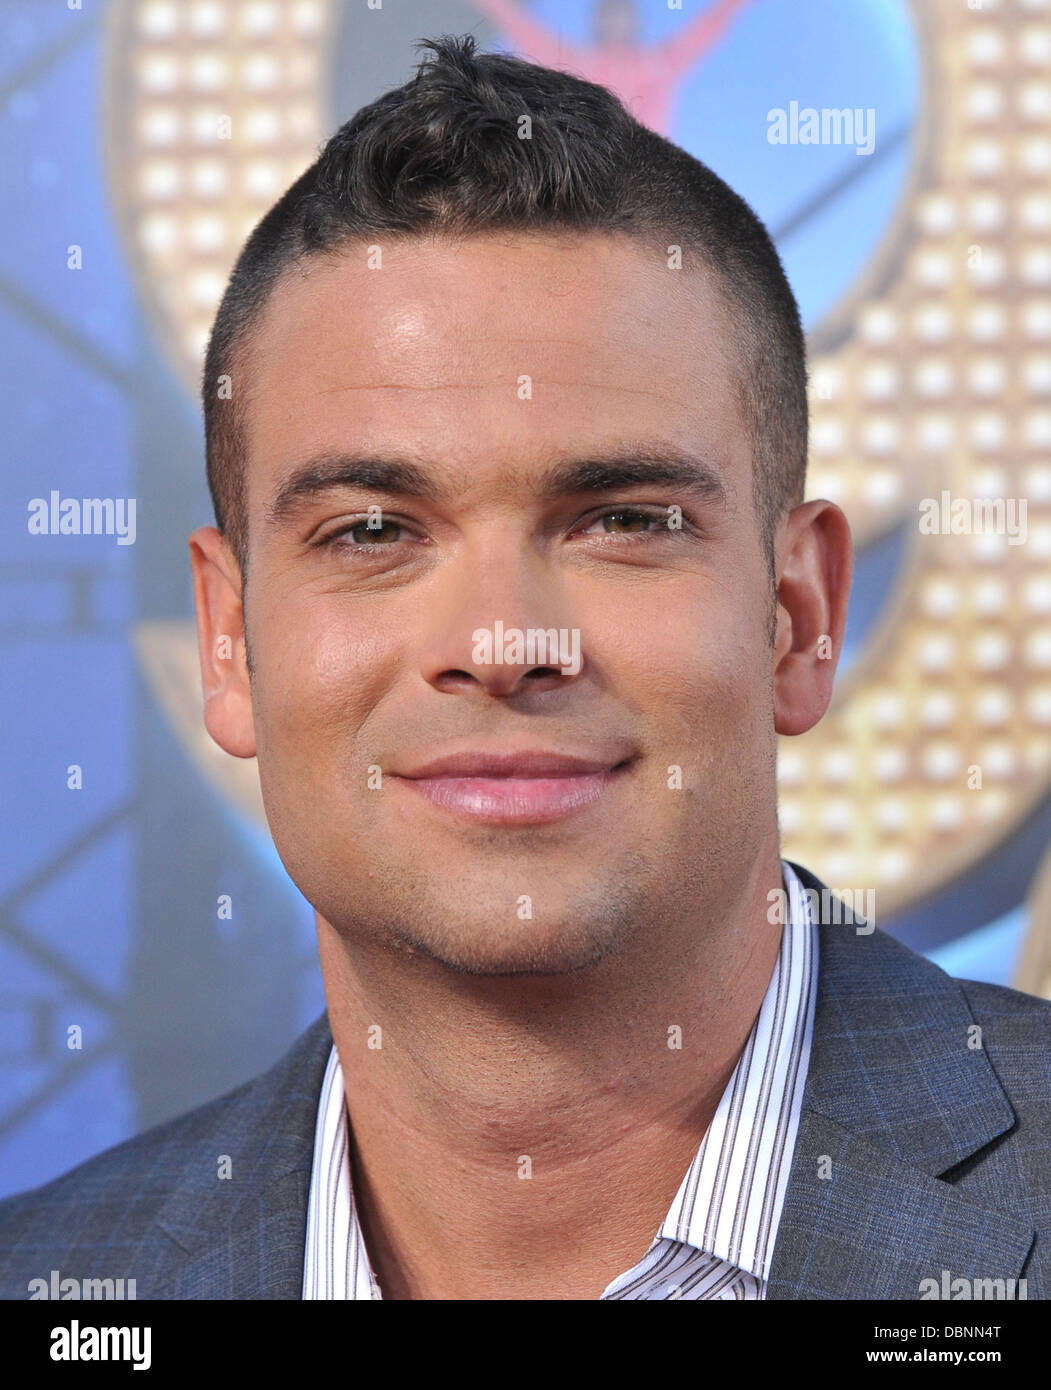 Mark Salling The world premiere of 'Glee: The 3D Concert Movie' held at the Regency Village Theatre - Arrivals Los Angeles, California - 06.08.11 Stock Photo